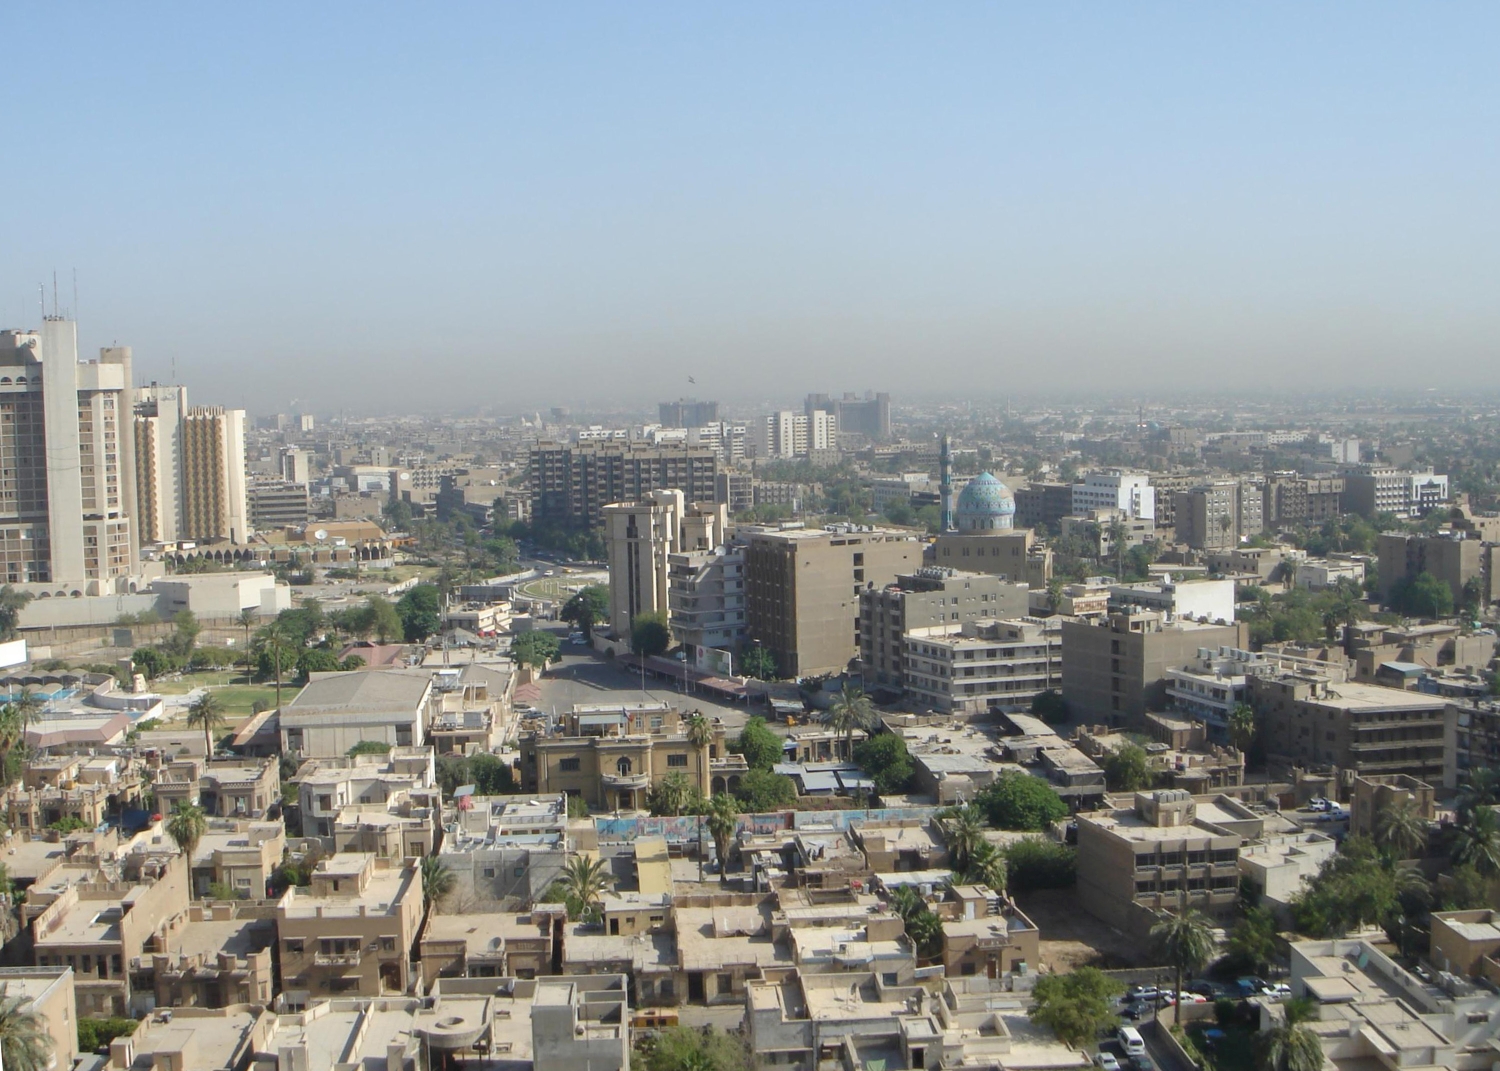  Baghdad - Bird's-eye view to the north, Ishtar Sheraton and International Palestine hotels at far left in distance